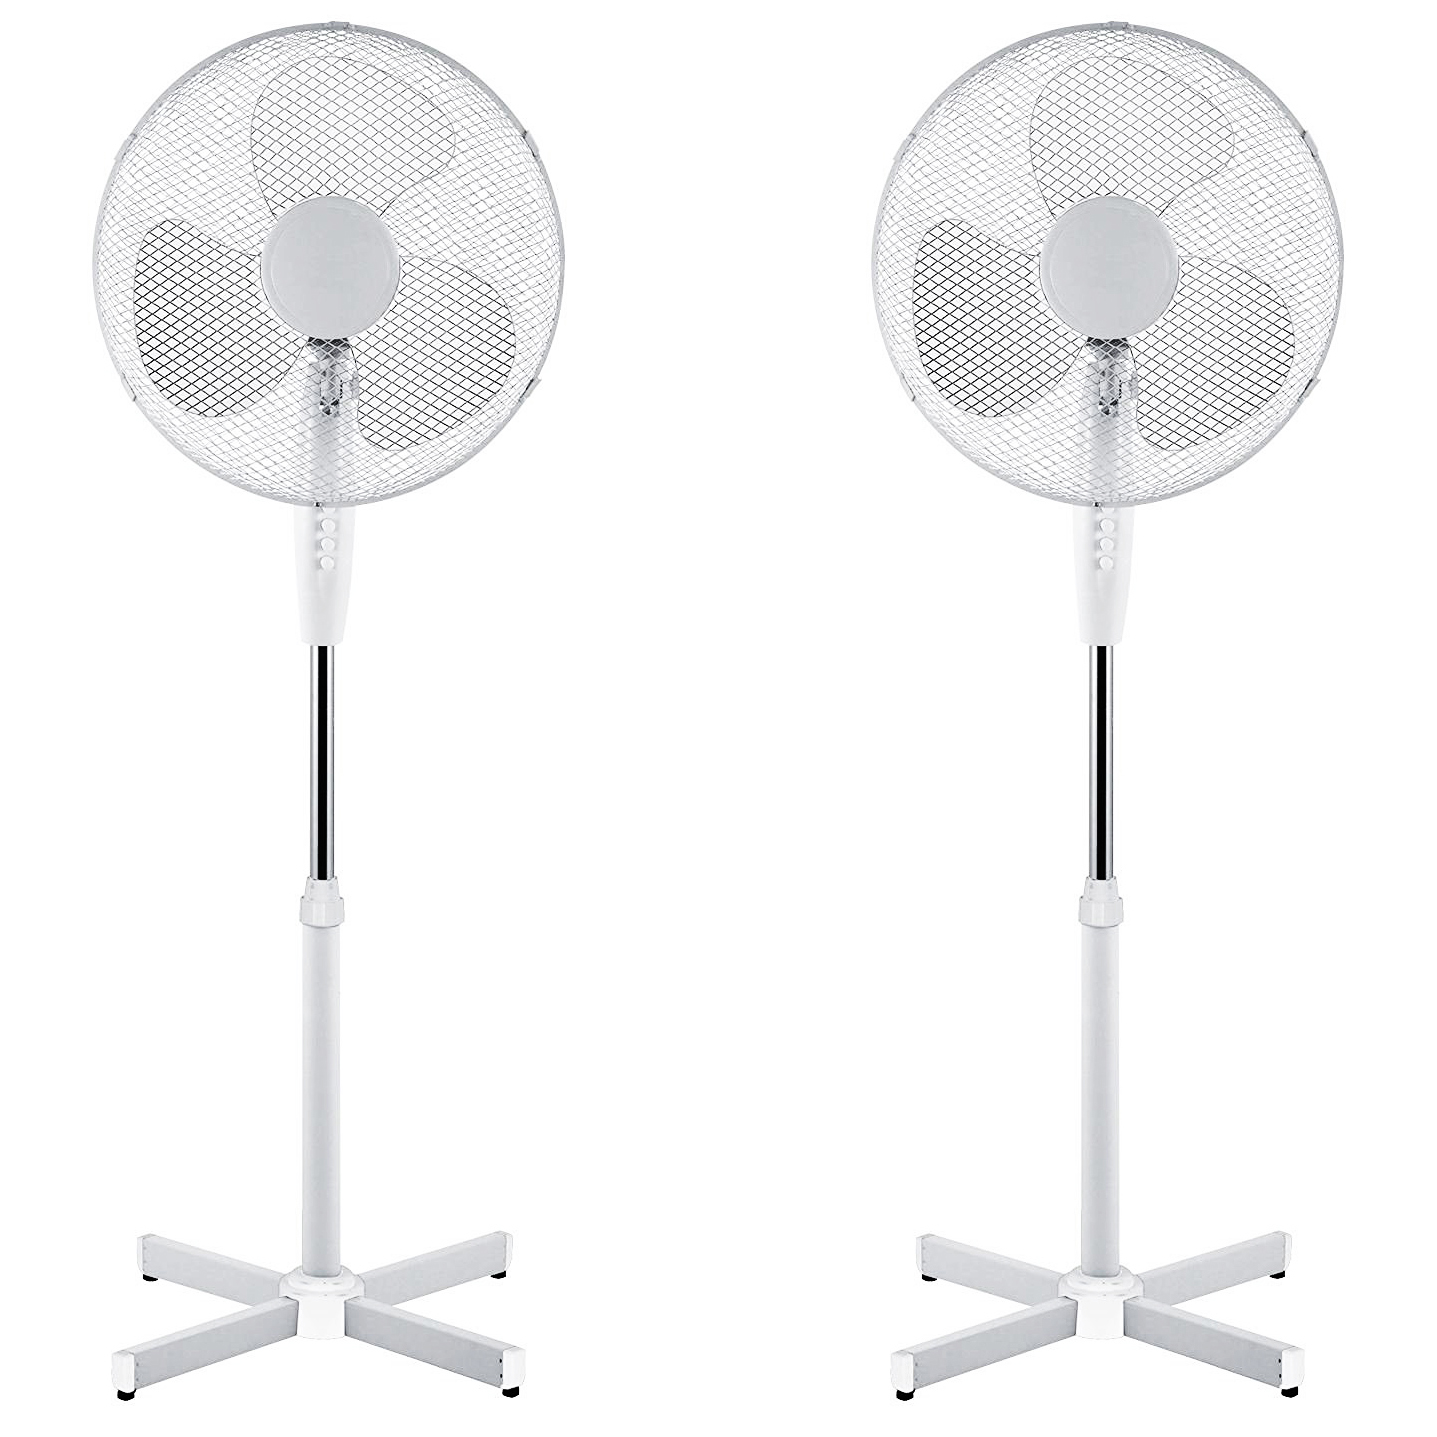 2 x 16 Electrical Oscillating Electric Fans